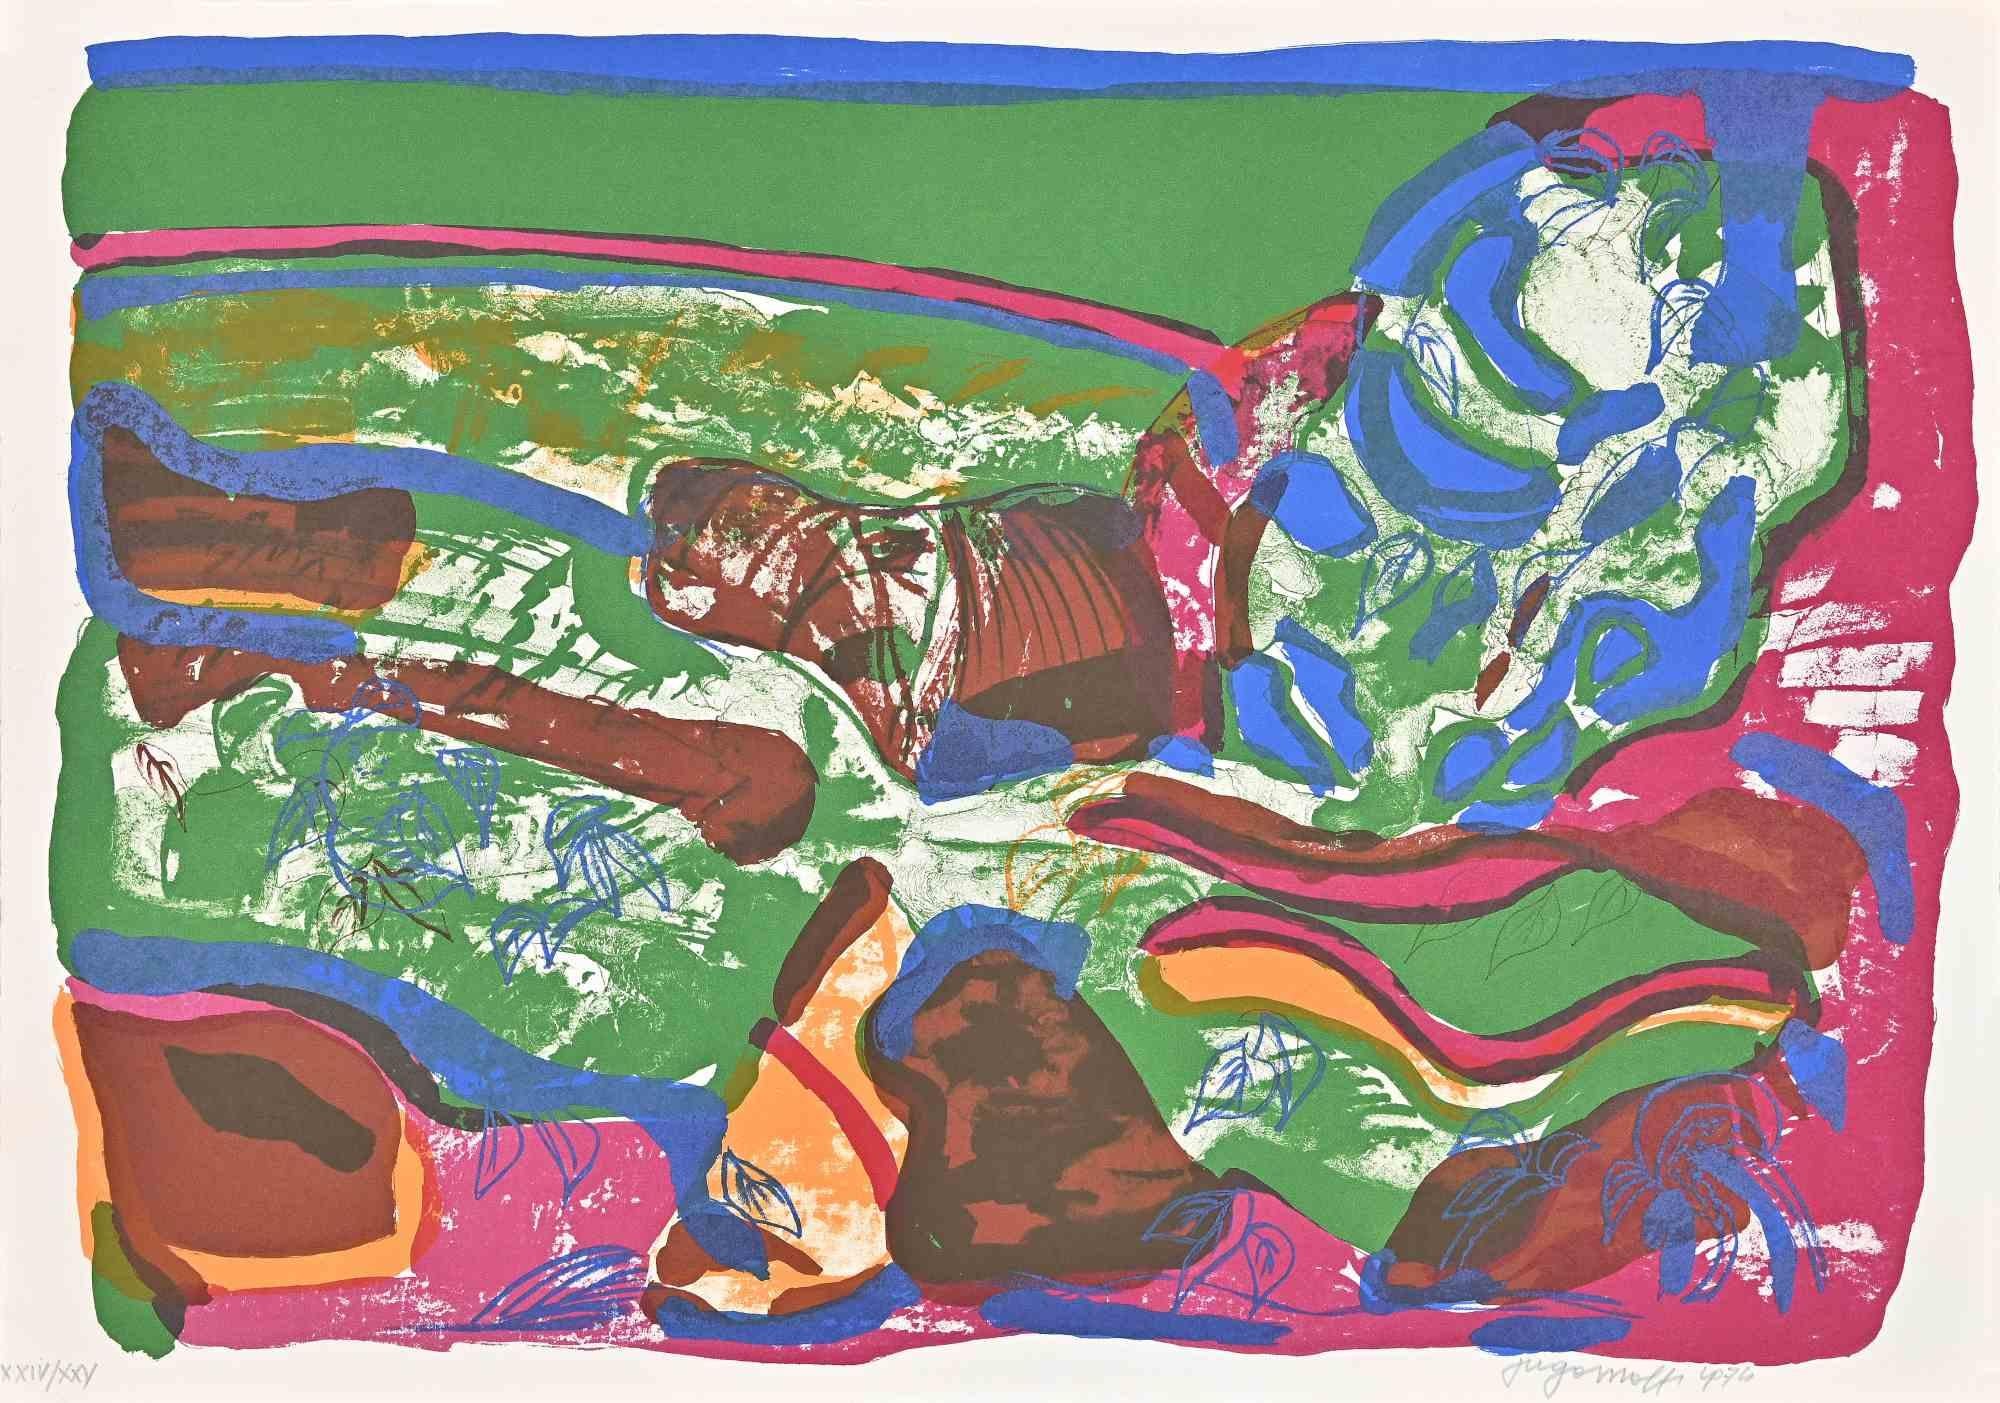 Abstract Composition - Lithograph by Ugo Maffi - 1974